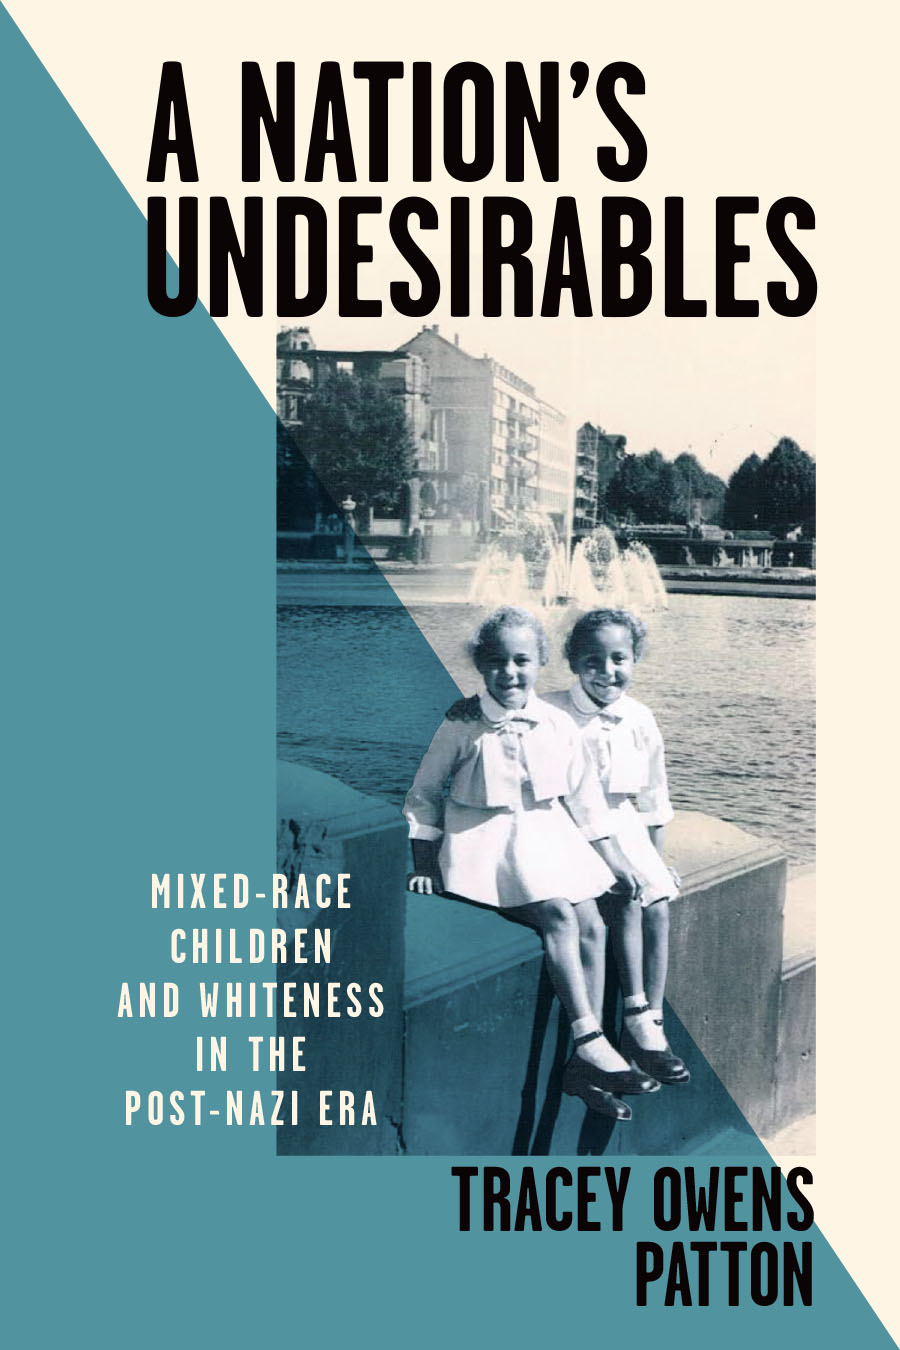  A Nation’s Undesirables: Mixed-Race Children and Whiteness in the Post-Nazi Era book cover